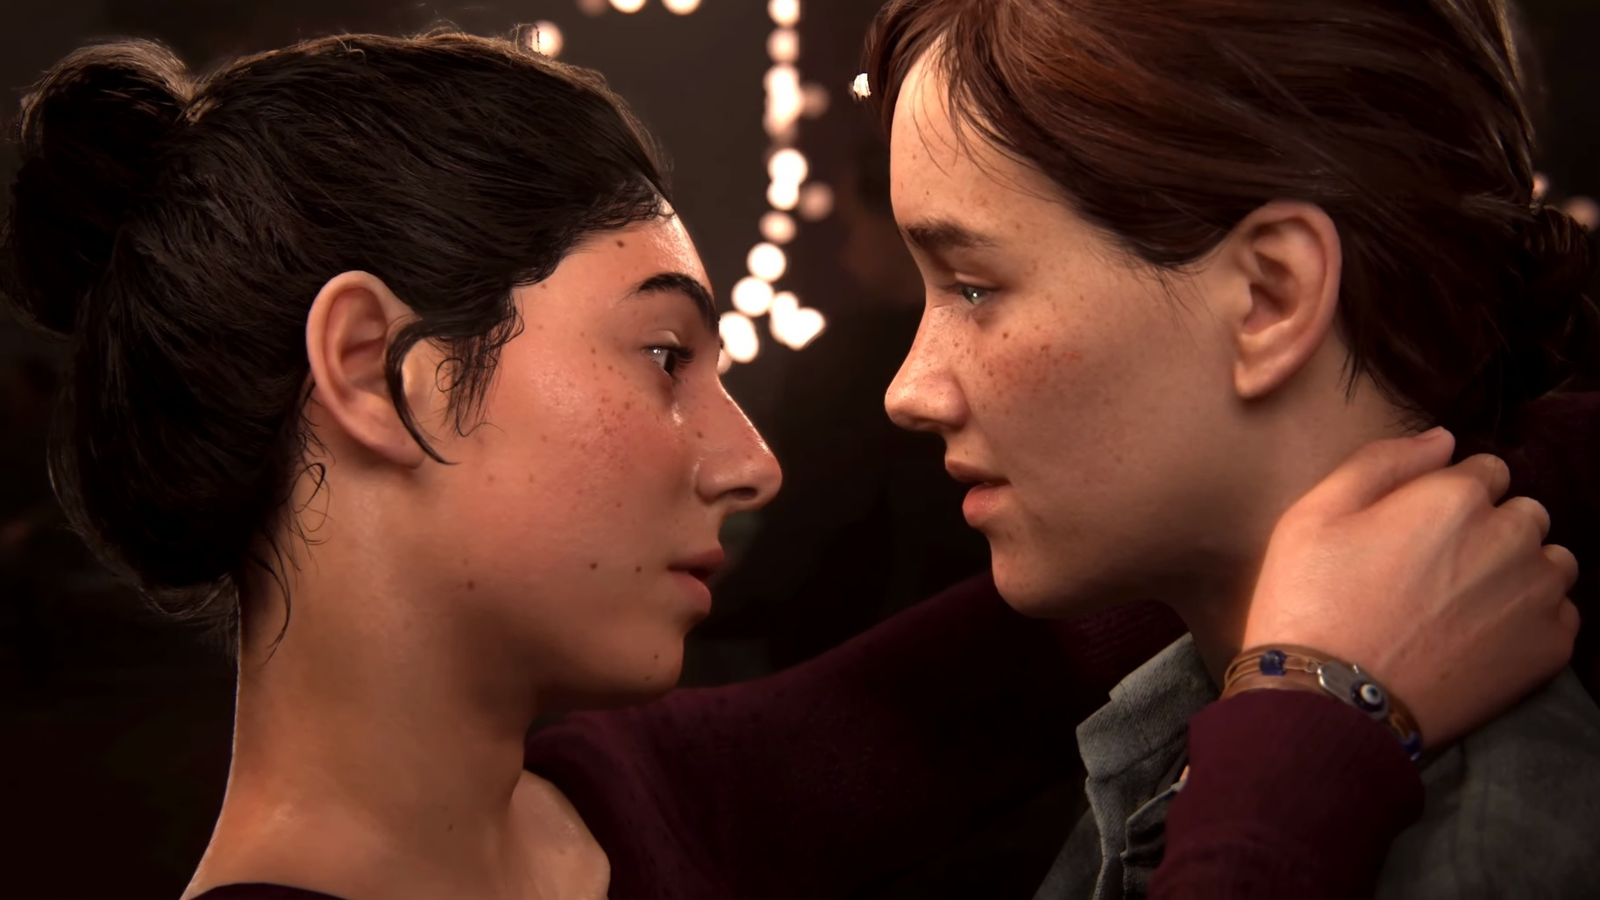 The Last of Us' episode 2: That 'kiss' makes the Clickers even